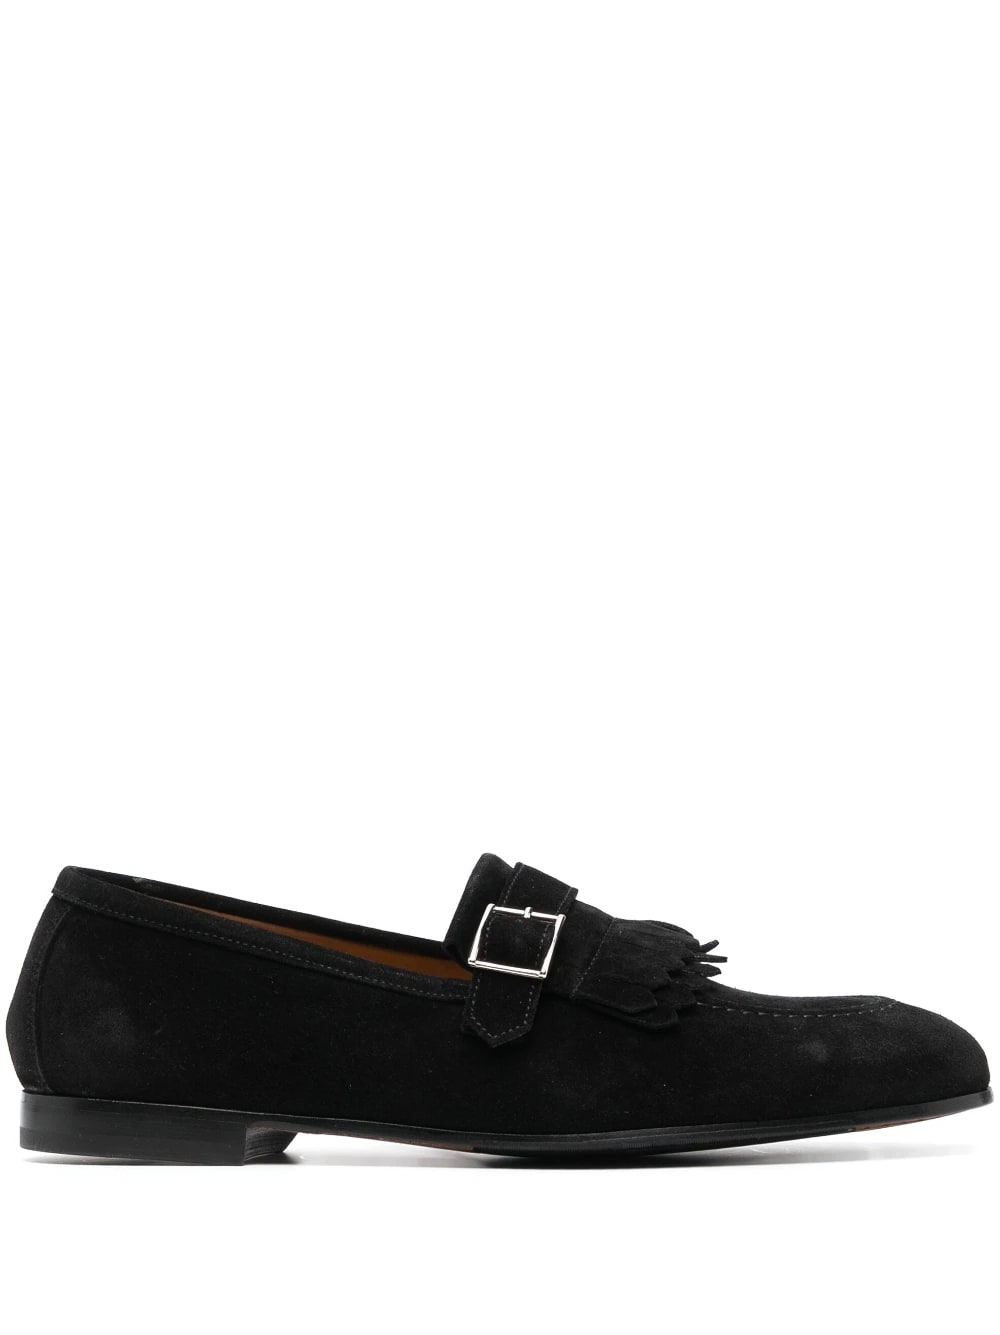 DOUCAL'S BLACK SUEDE LOAFER WITH FRINGES AND BUCKLE